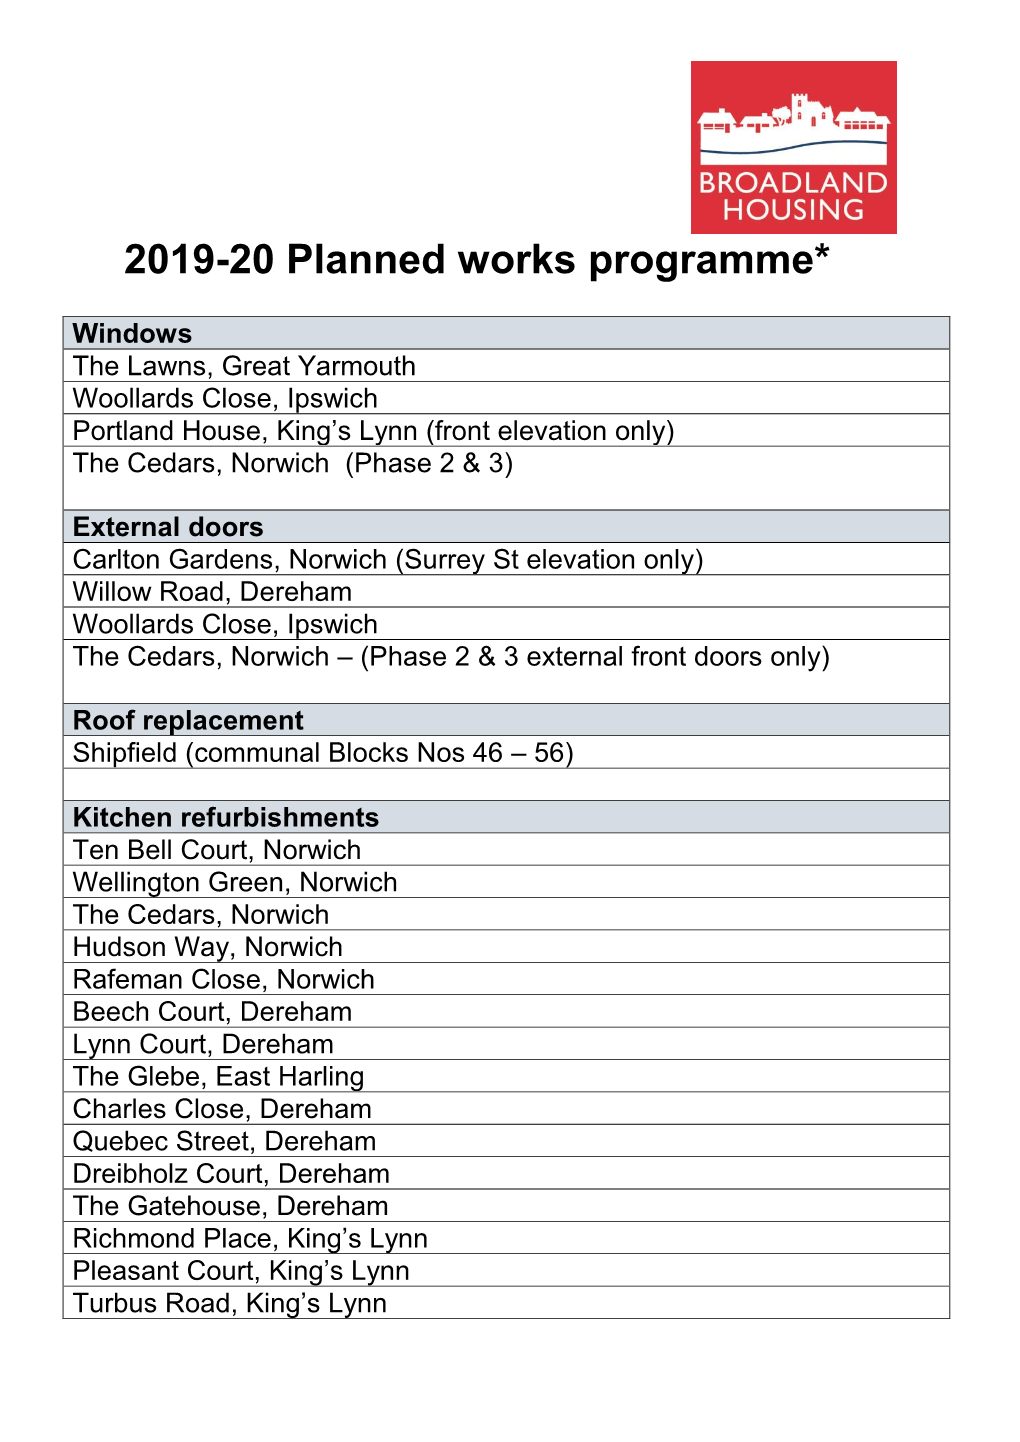 2019-20 Planned Works Programme*